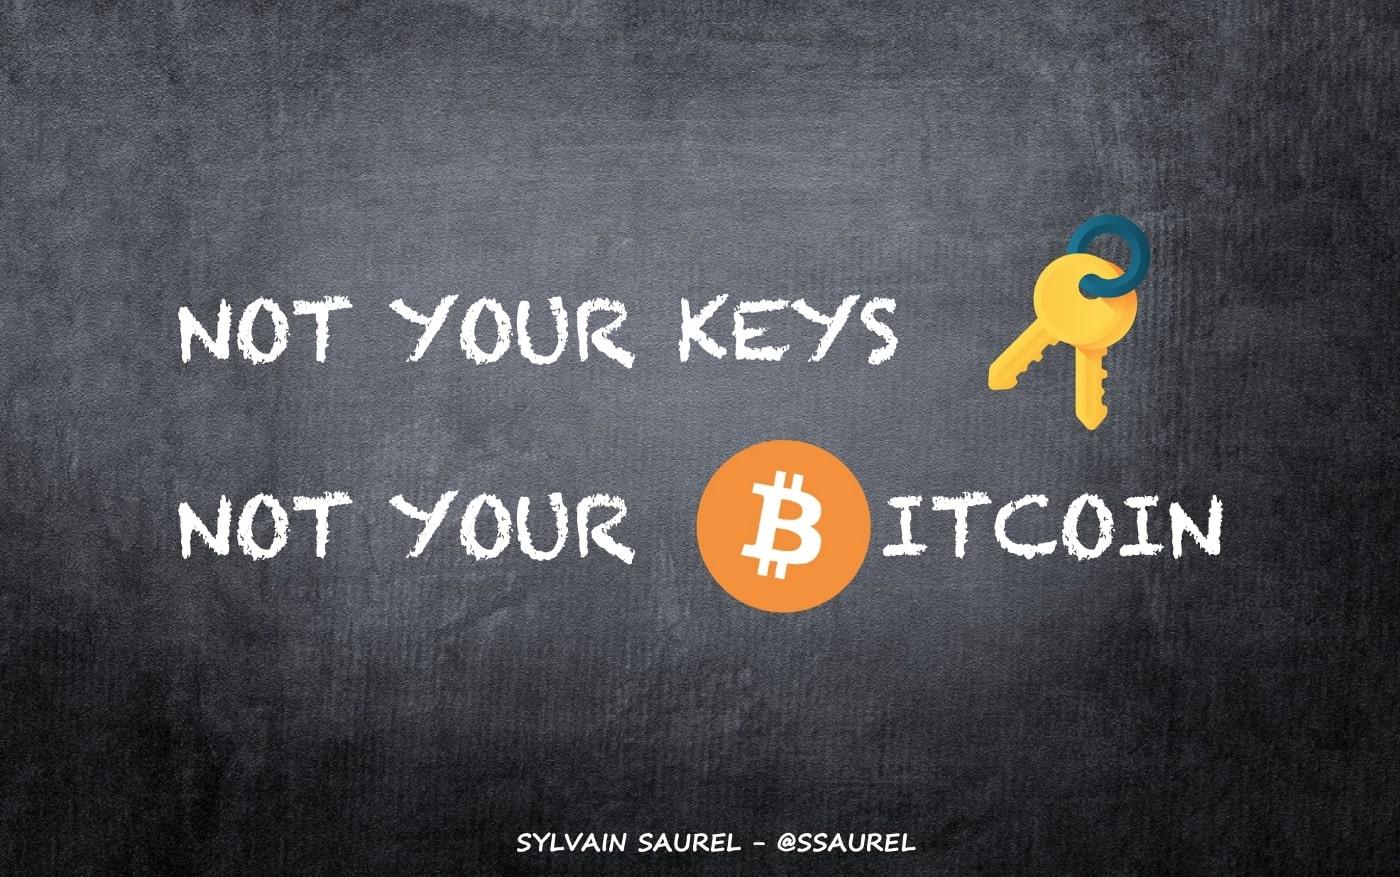 Not your Keys, Not your Bitcoin